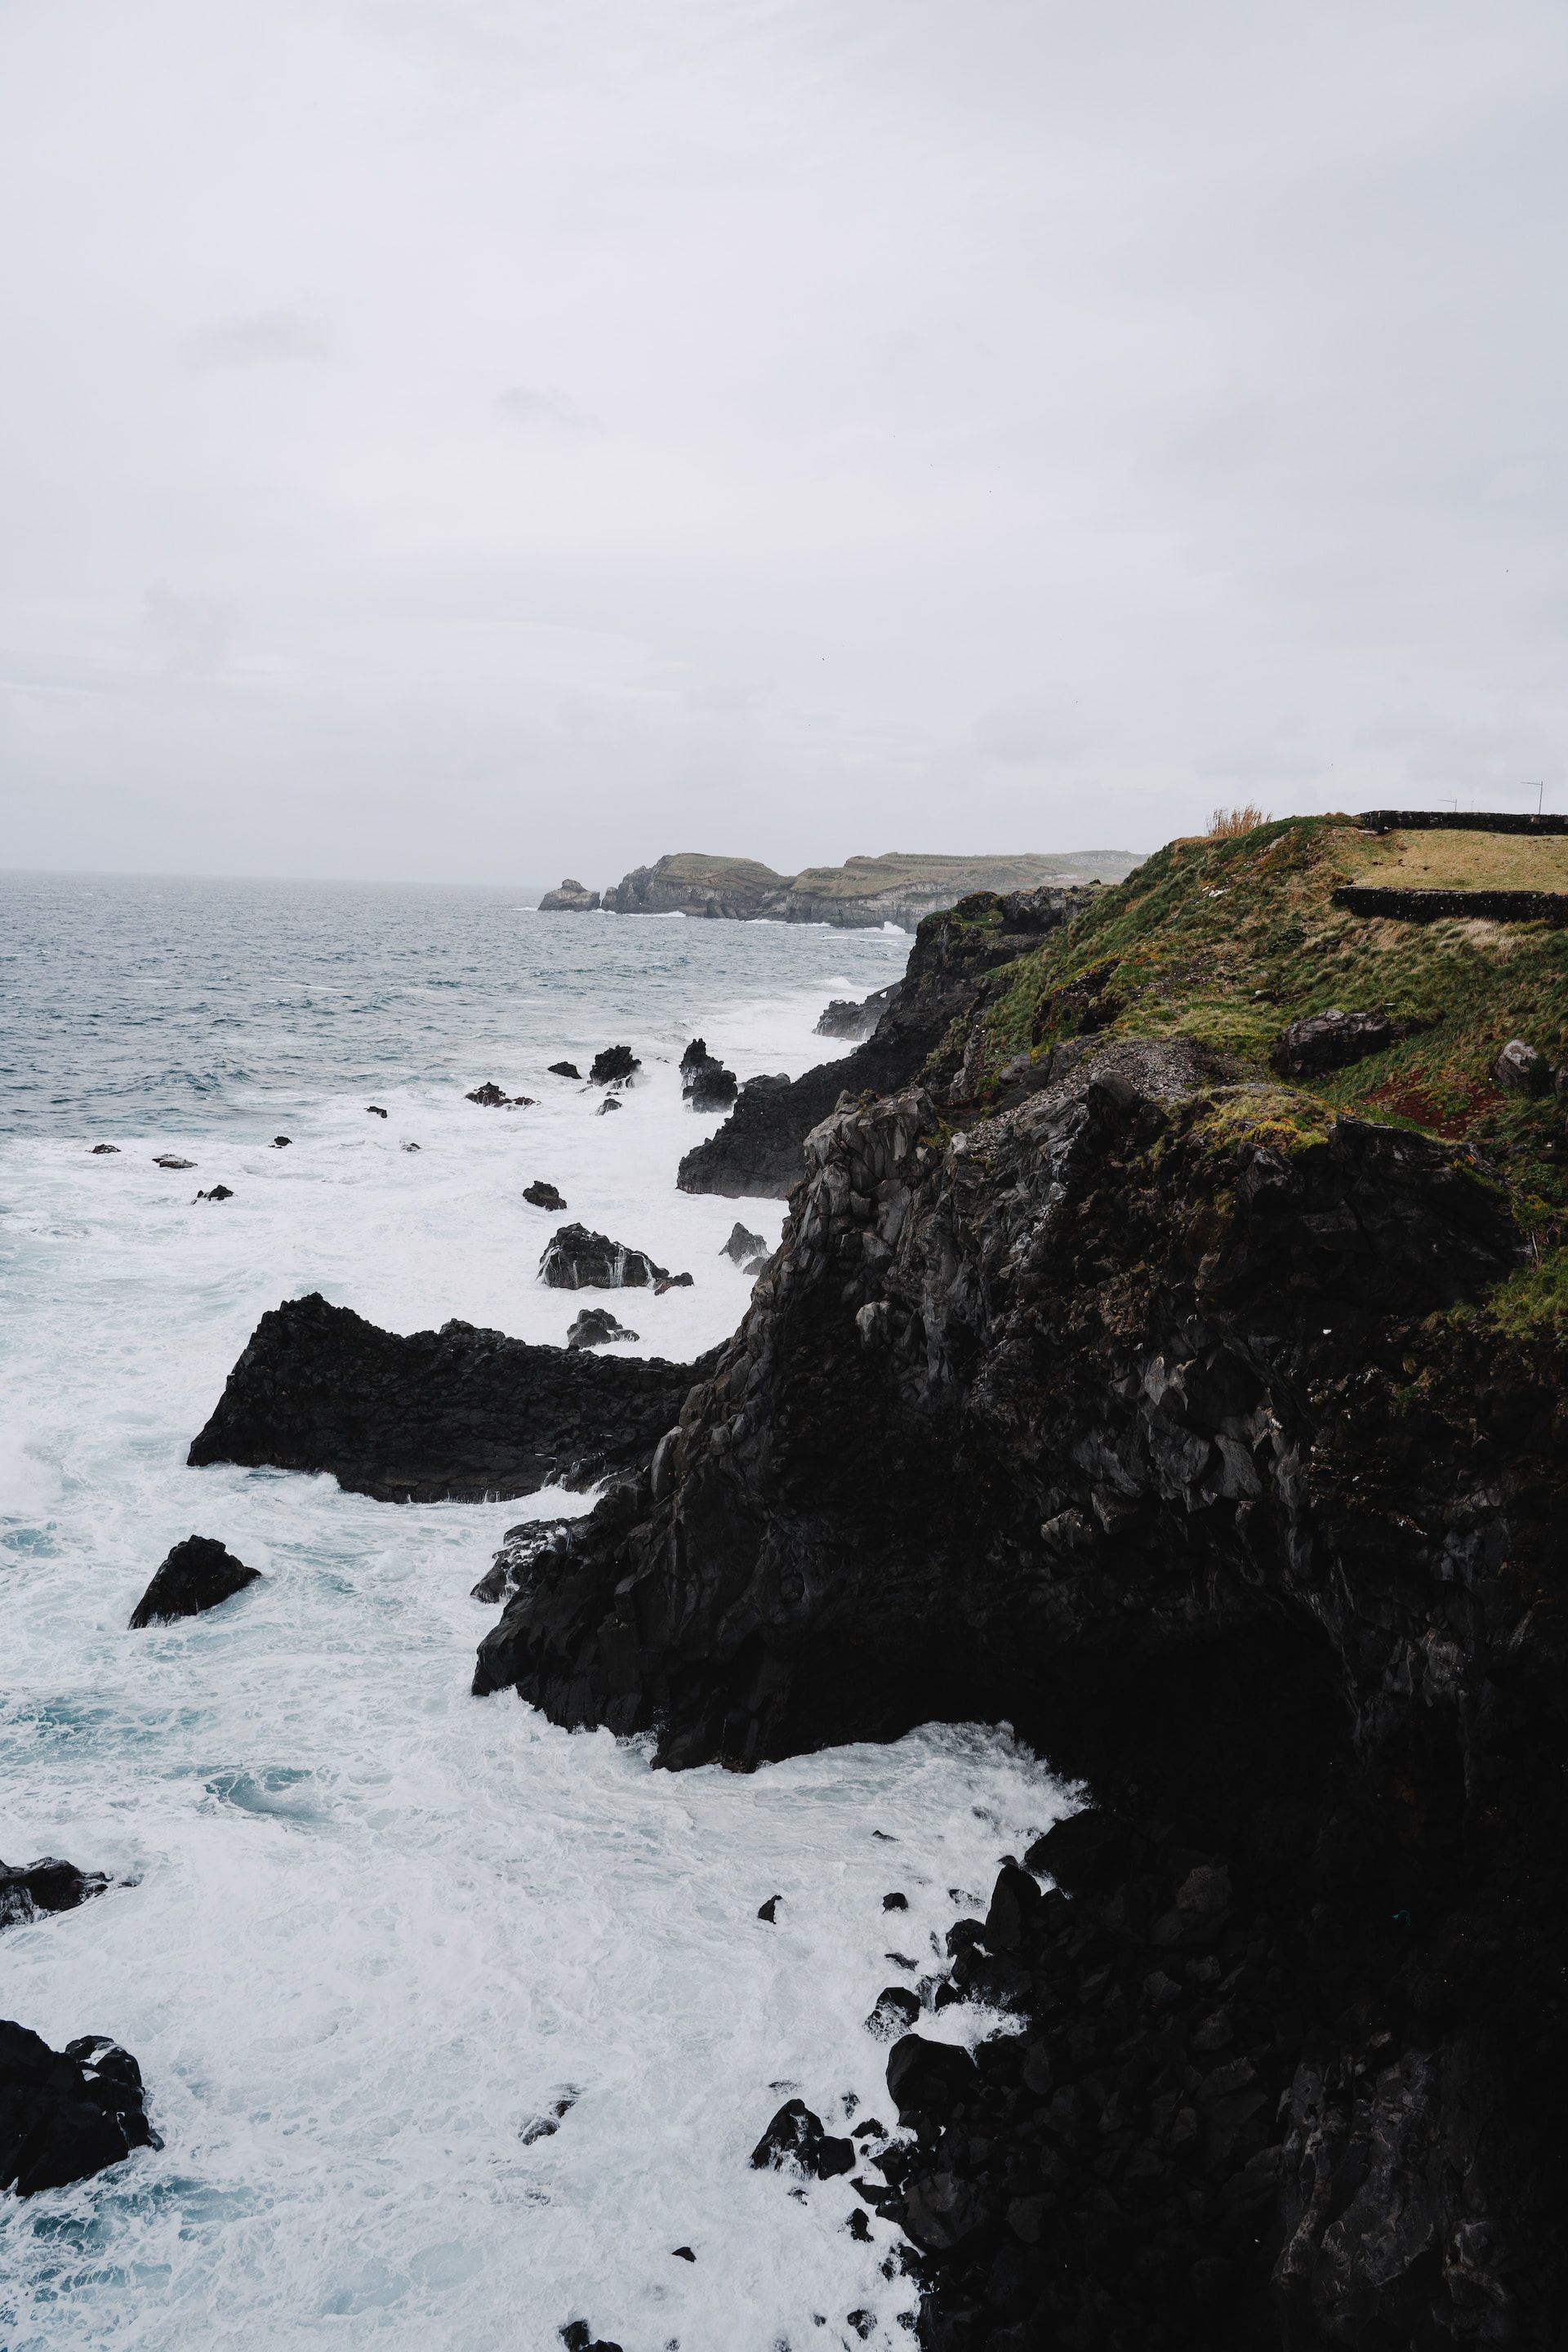 A rocky cliff overlooking the ocean on a cloudy day.